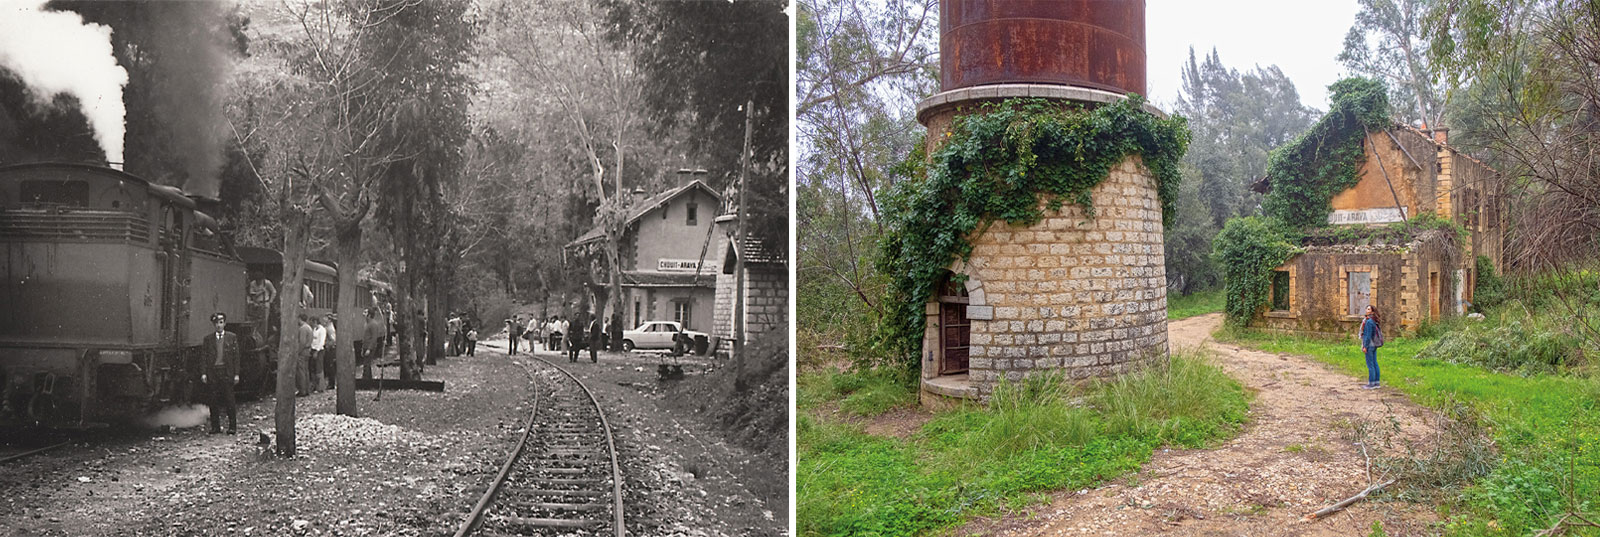 After Chouit-Araya station, photographed here in the early 1970s, the track reached its steepest incline—so steep the train had to be switched to reverse up the five kilometers to Aley, where it was switched back to run forward.